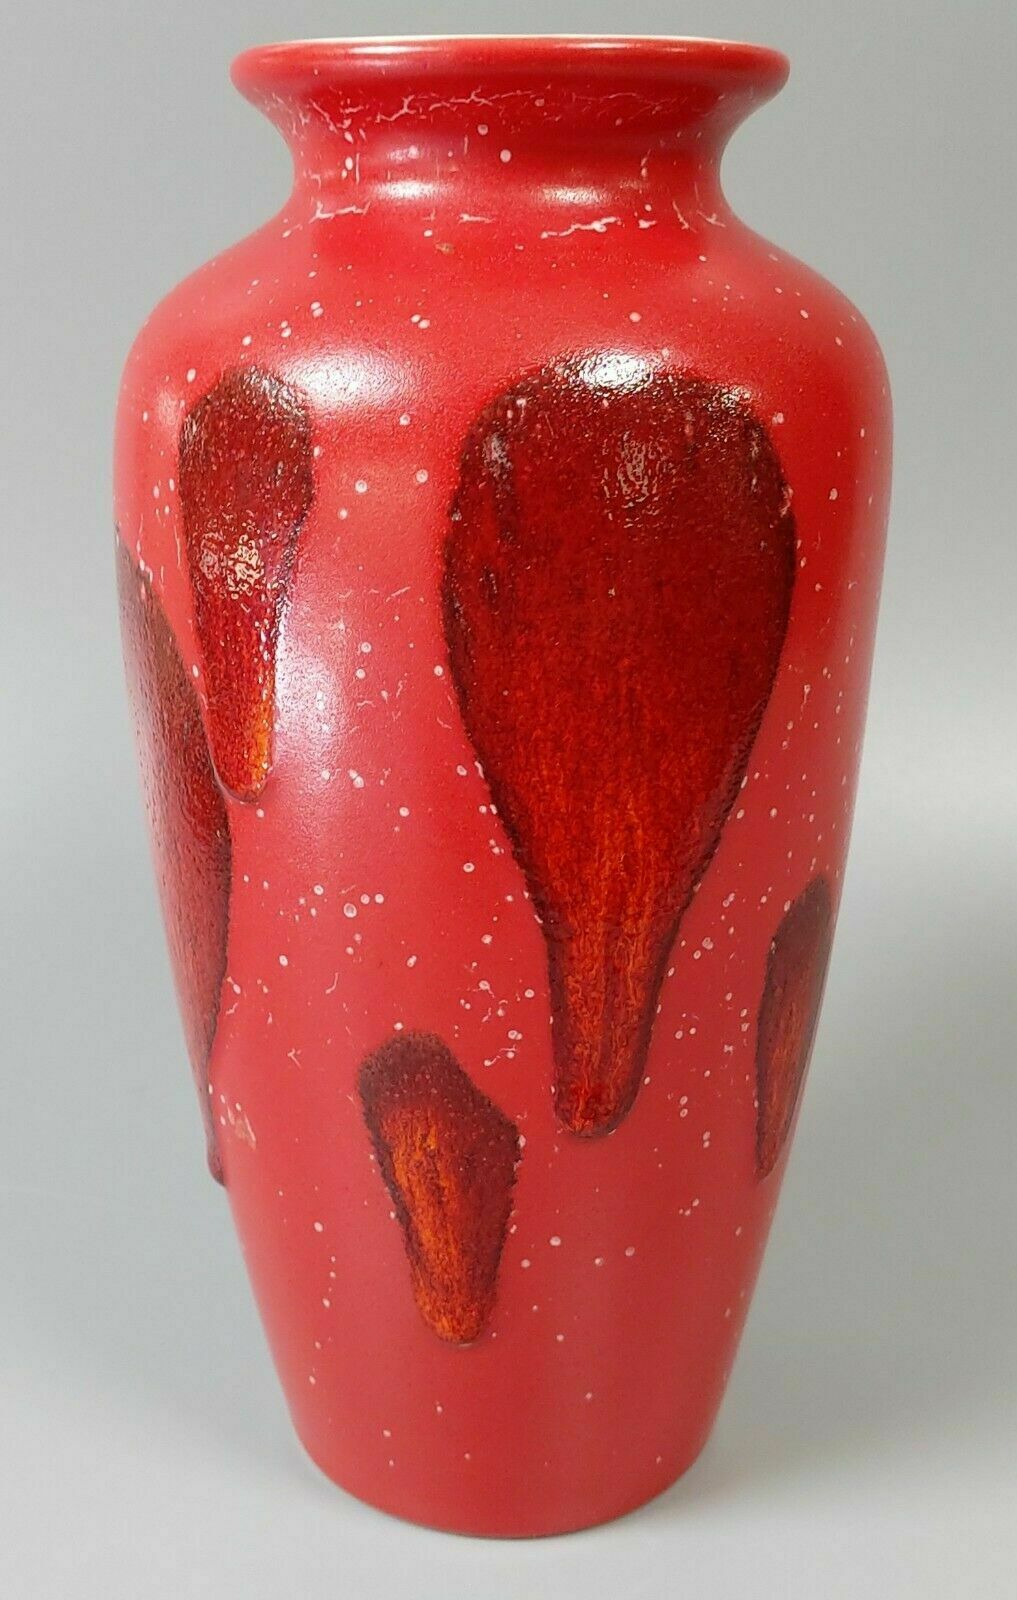 Poole Pottery Vase - 1970 - Patricia Wells - Signed - Galaxy And Crackle Glaze